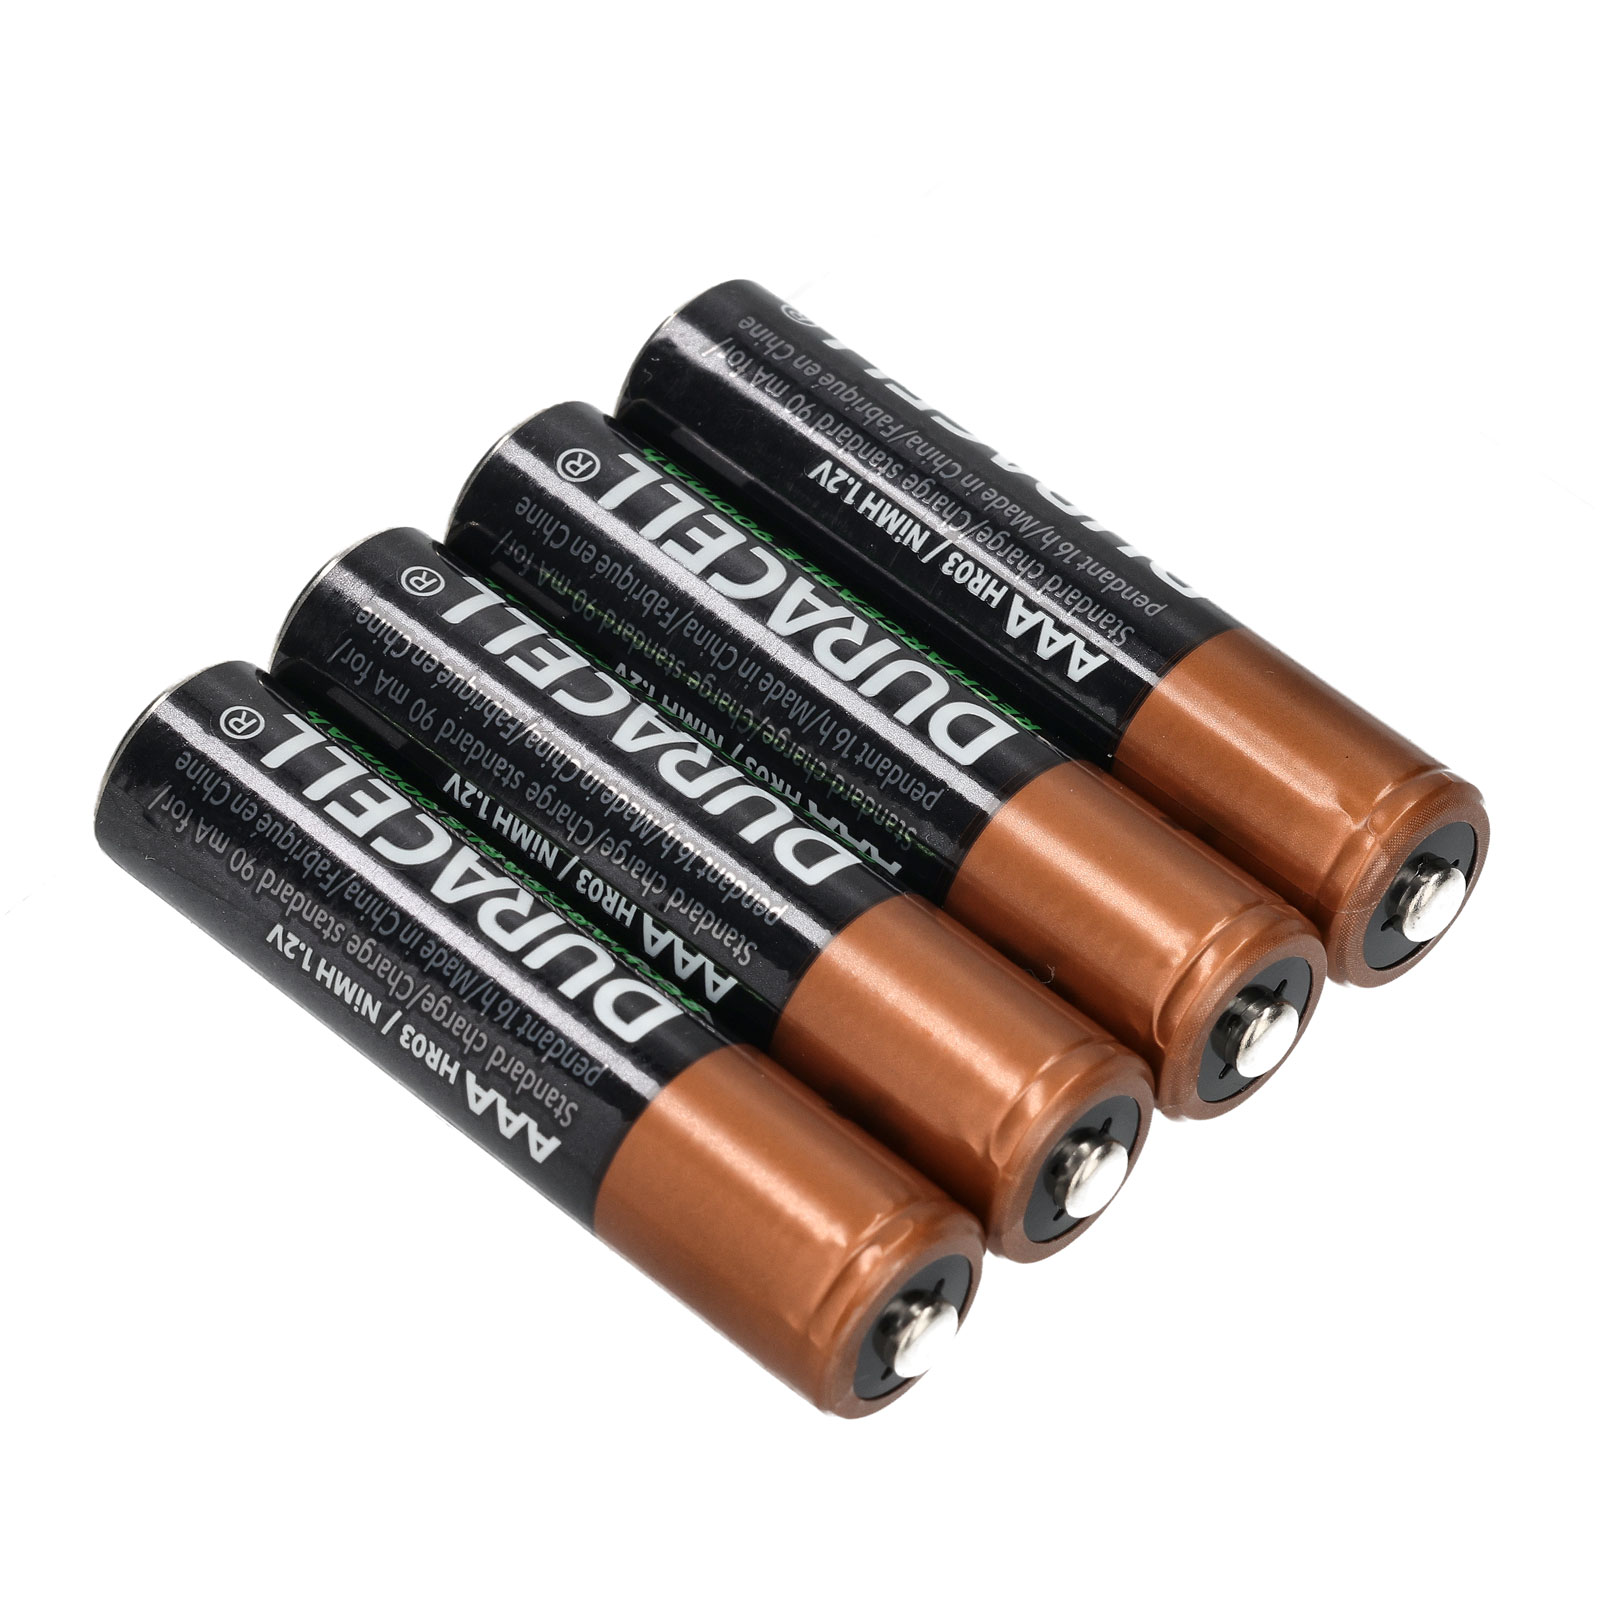 Chargeur + Piles Rechargeables Duracell Cef14 2 X Aa + 2 X Aaa